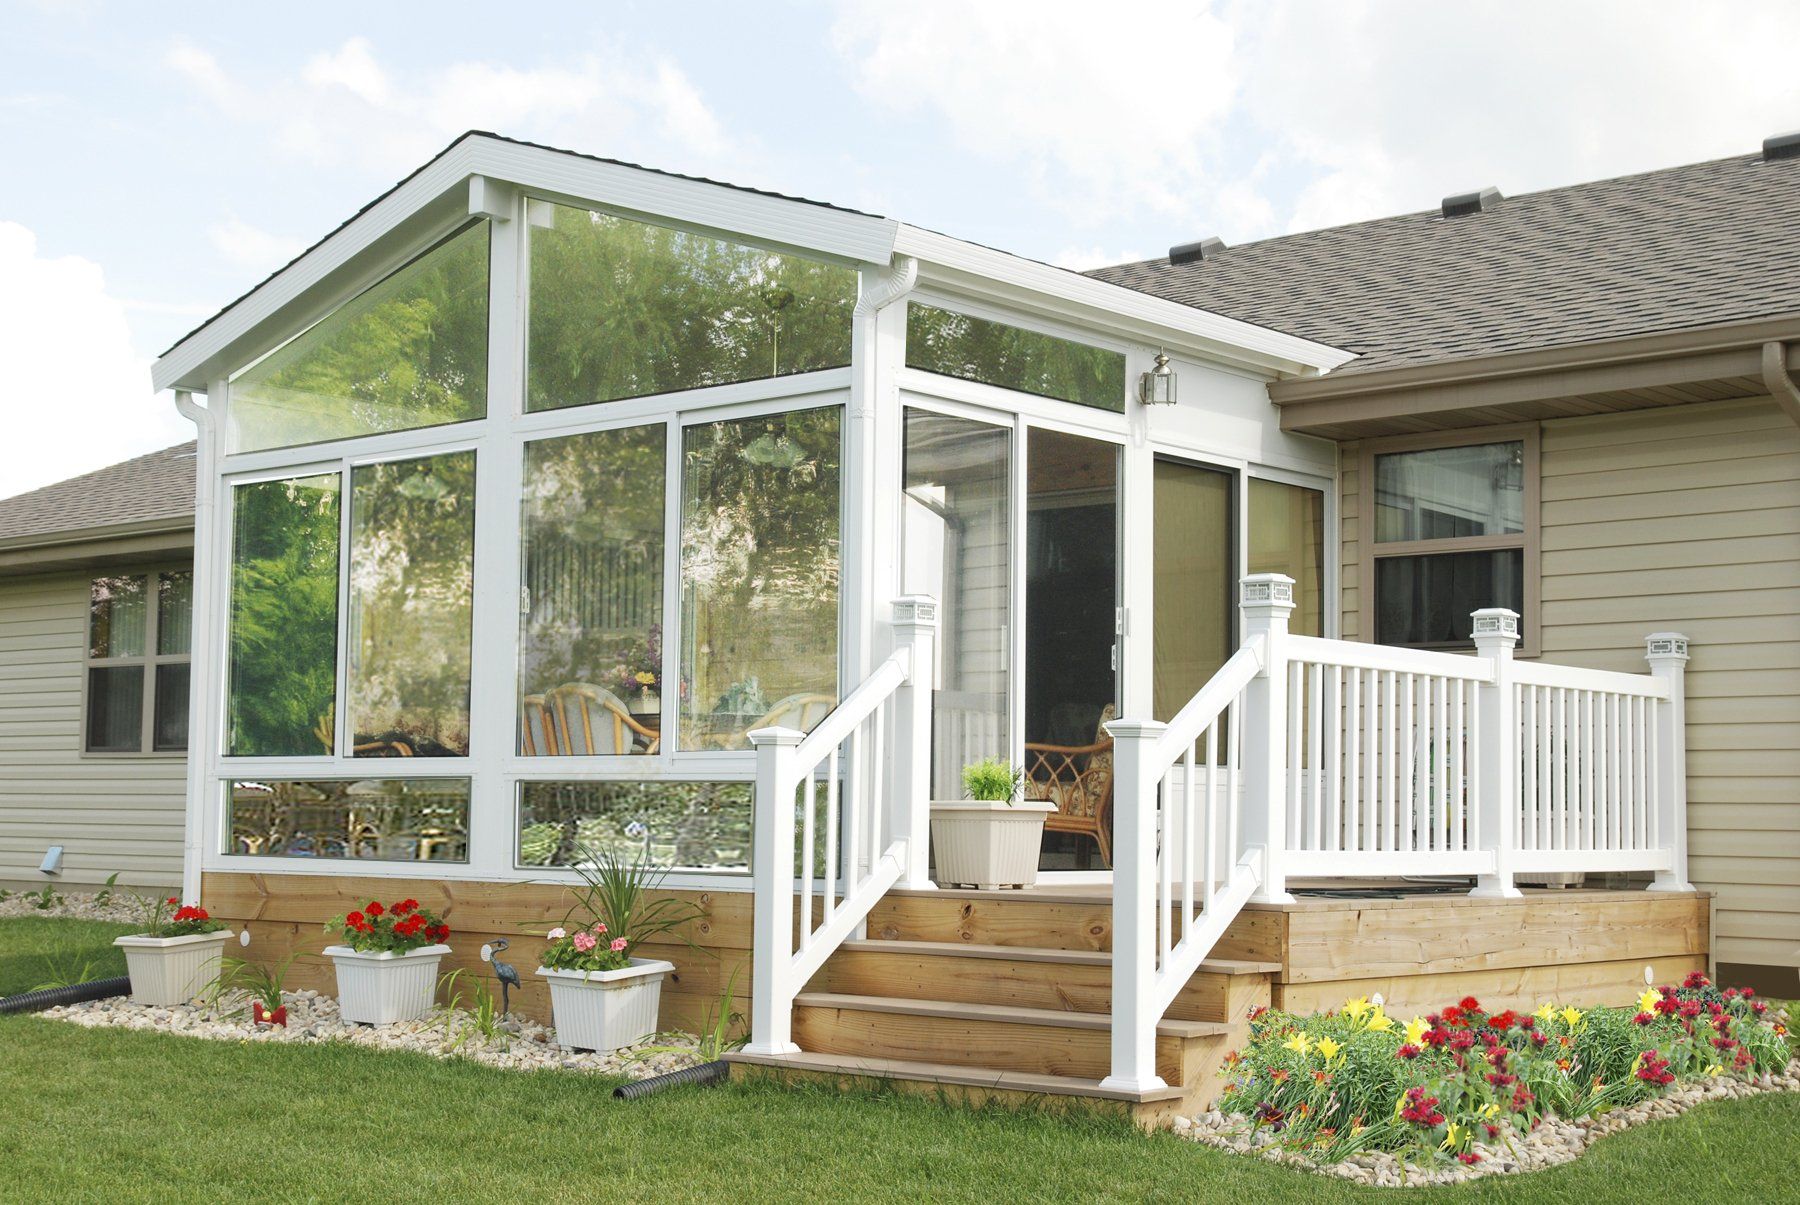 Four Season Sunrooms By Betterliving Patio And Sunrooms Of Pittsburgh